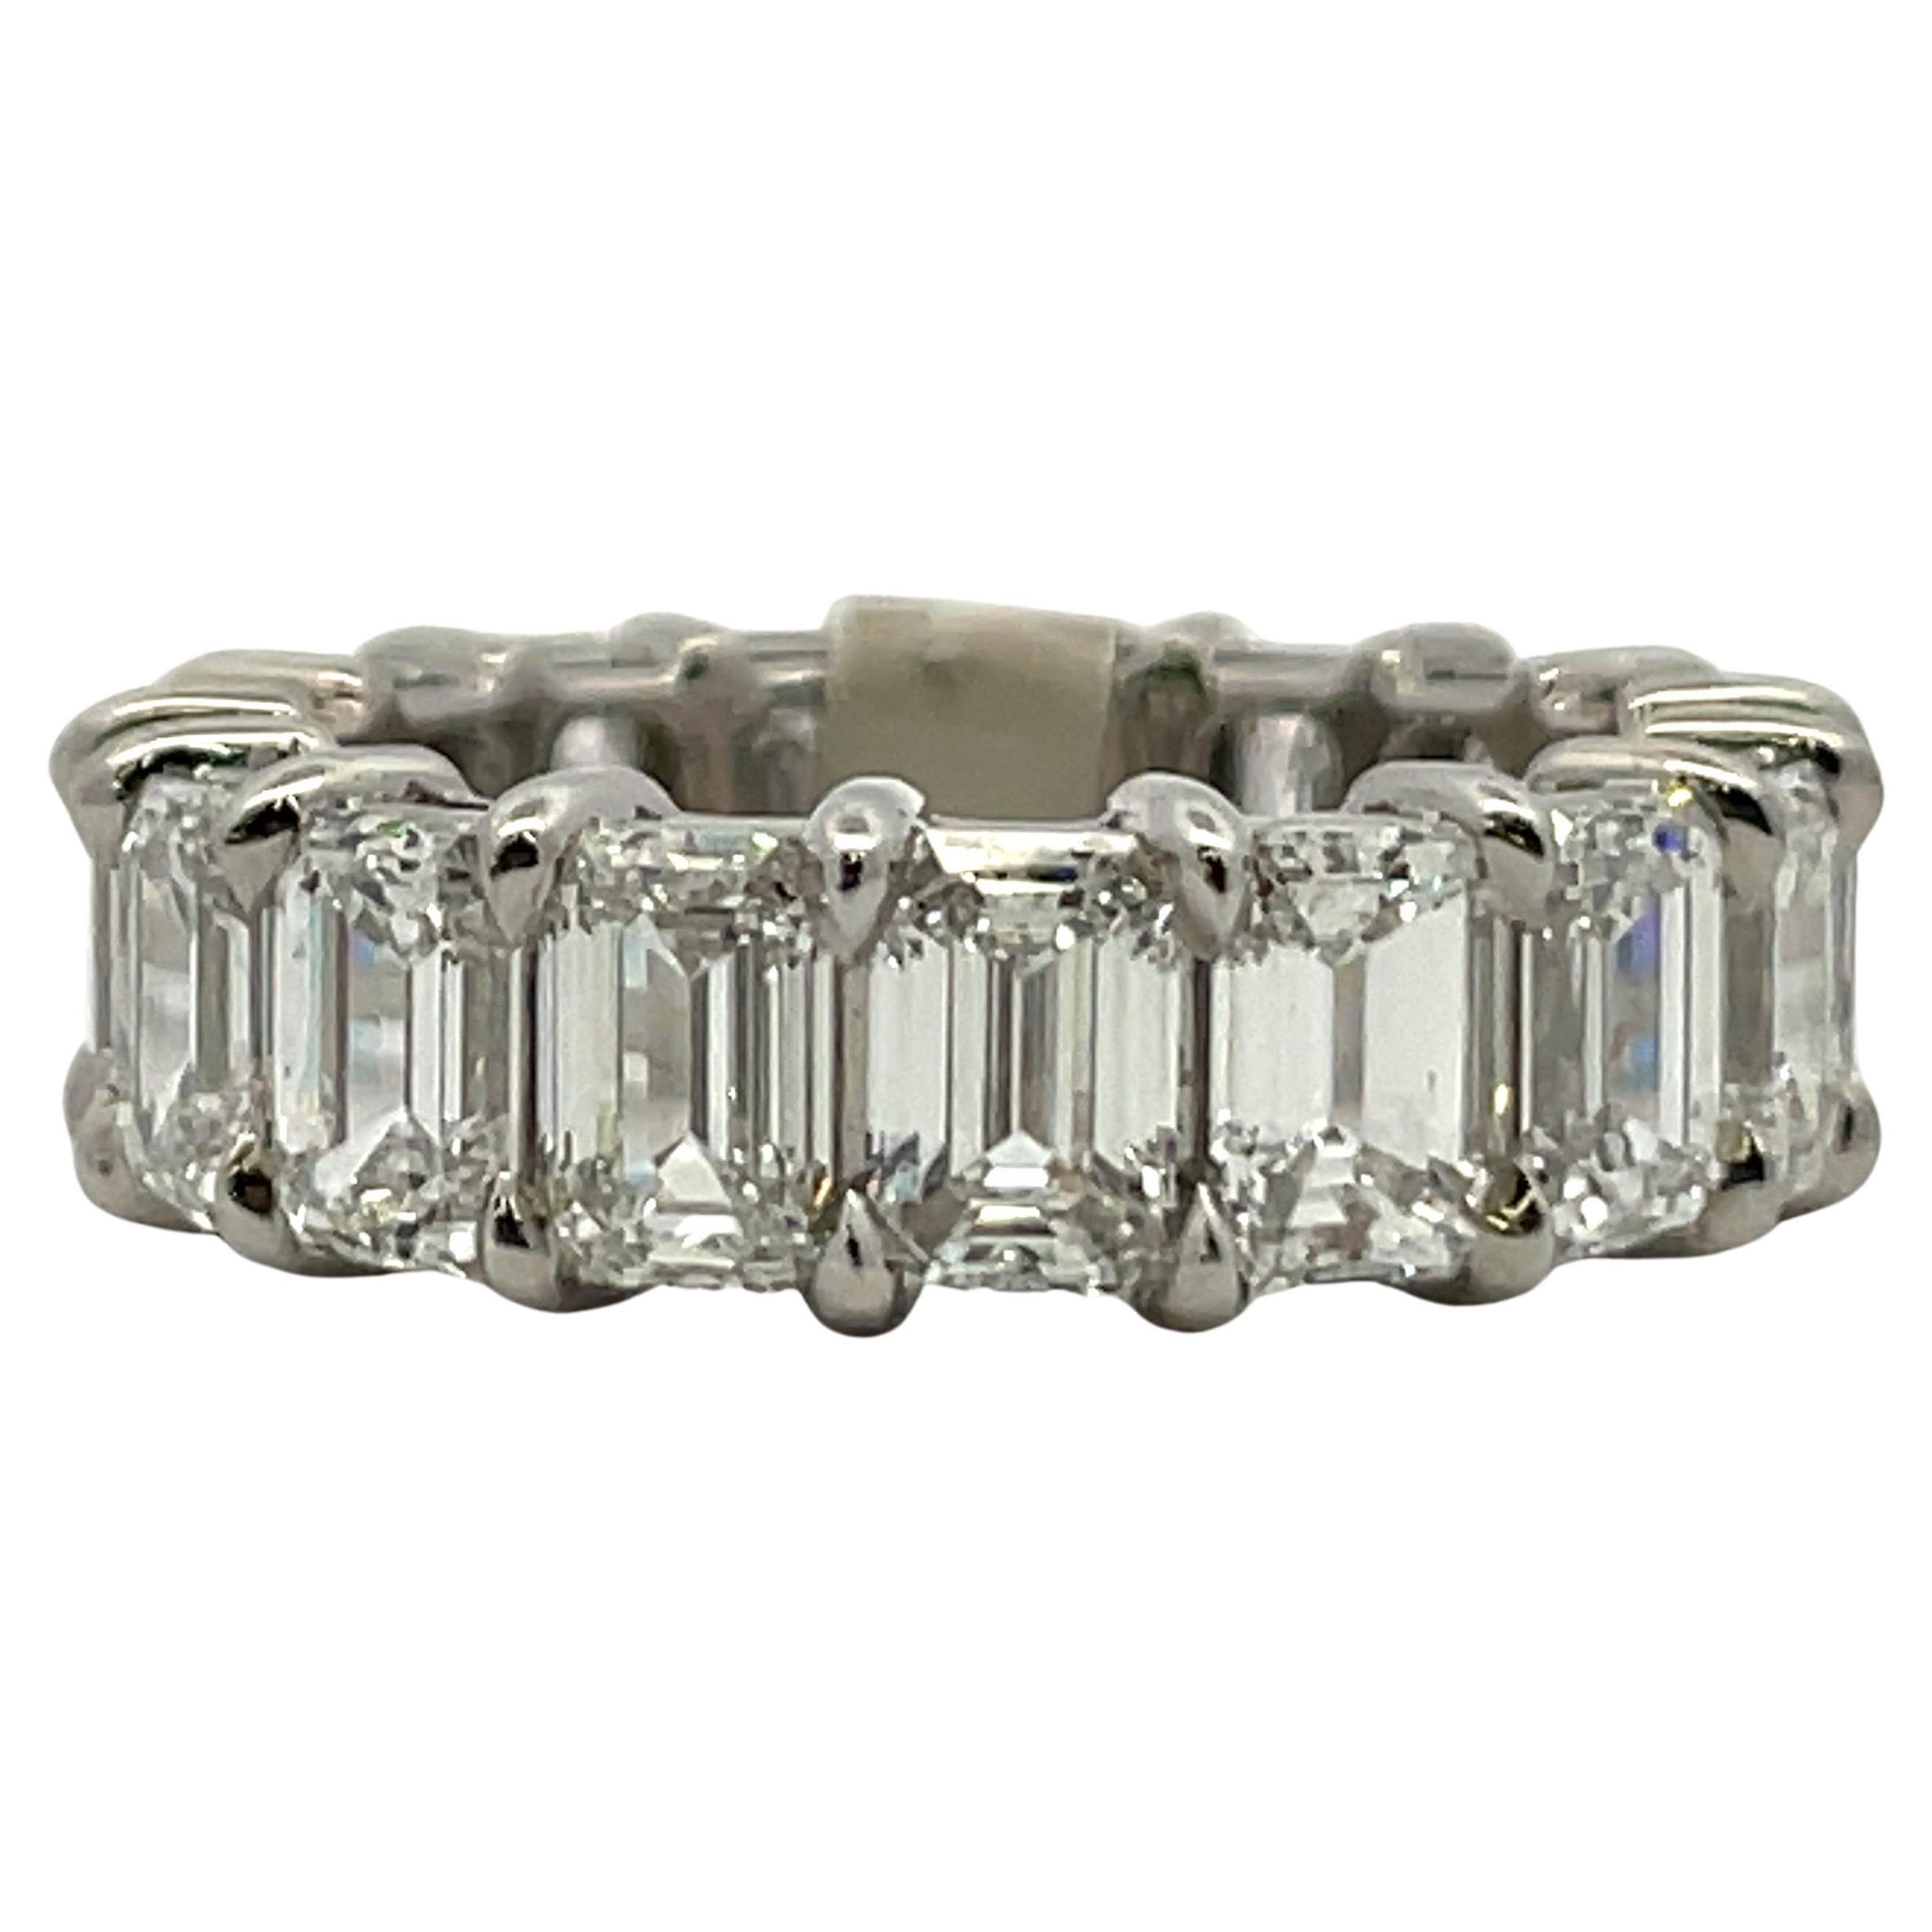 Magnificent GIA Certified eternity ring featuring 18 Emerald Cut Diamonds weighing 9.20 Carats, crafted in Platinum.  
Average 0.51 points 
All diamonds are GIA Certified with gradings from D-F Color, IF-VS2 Clarity. Perfectly Matched!
Very